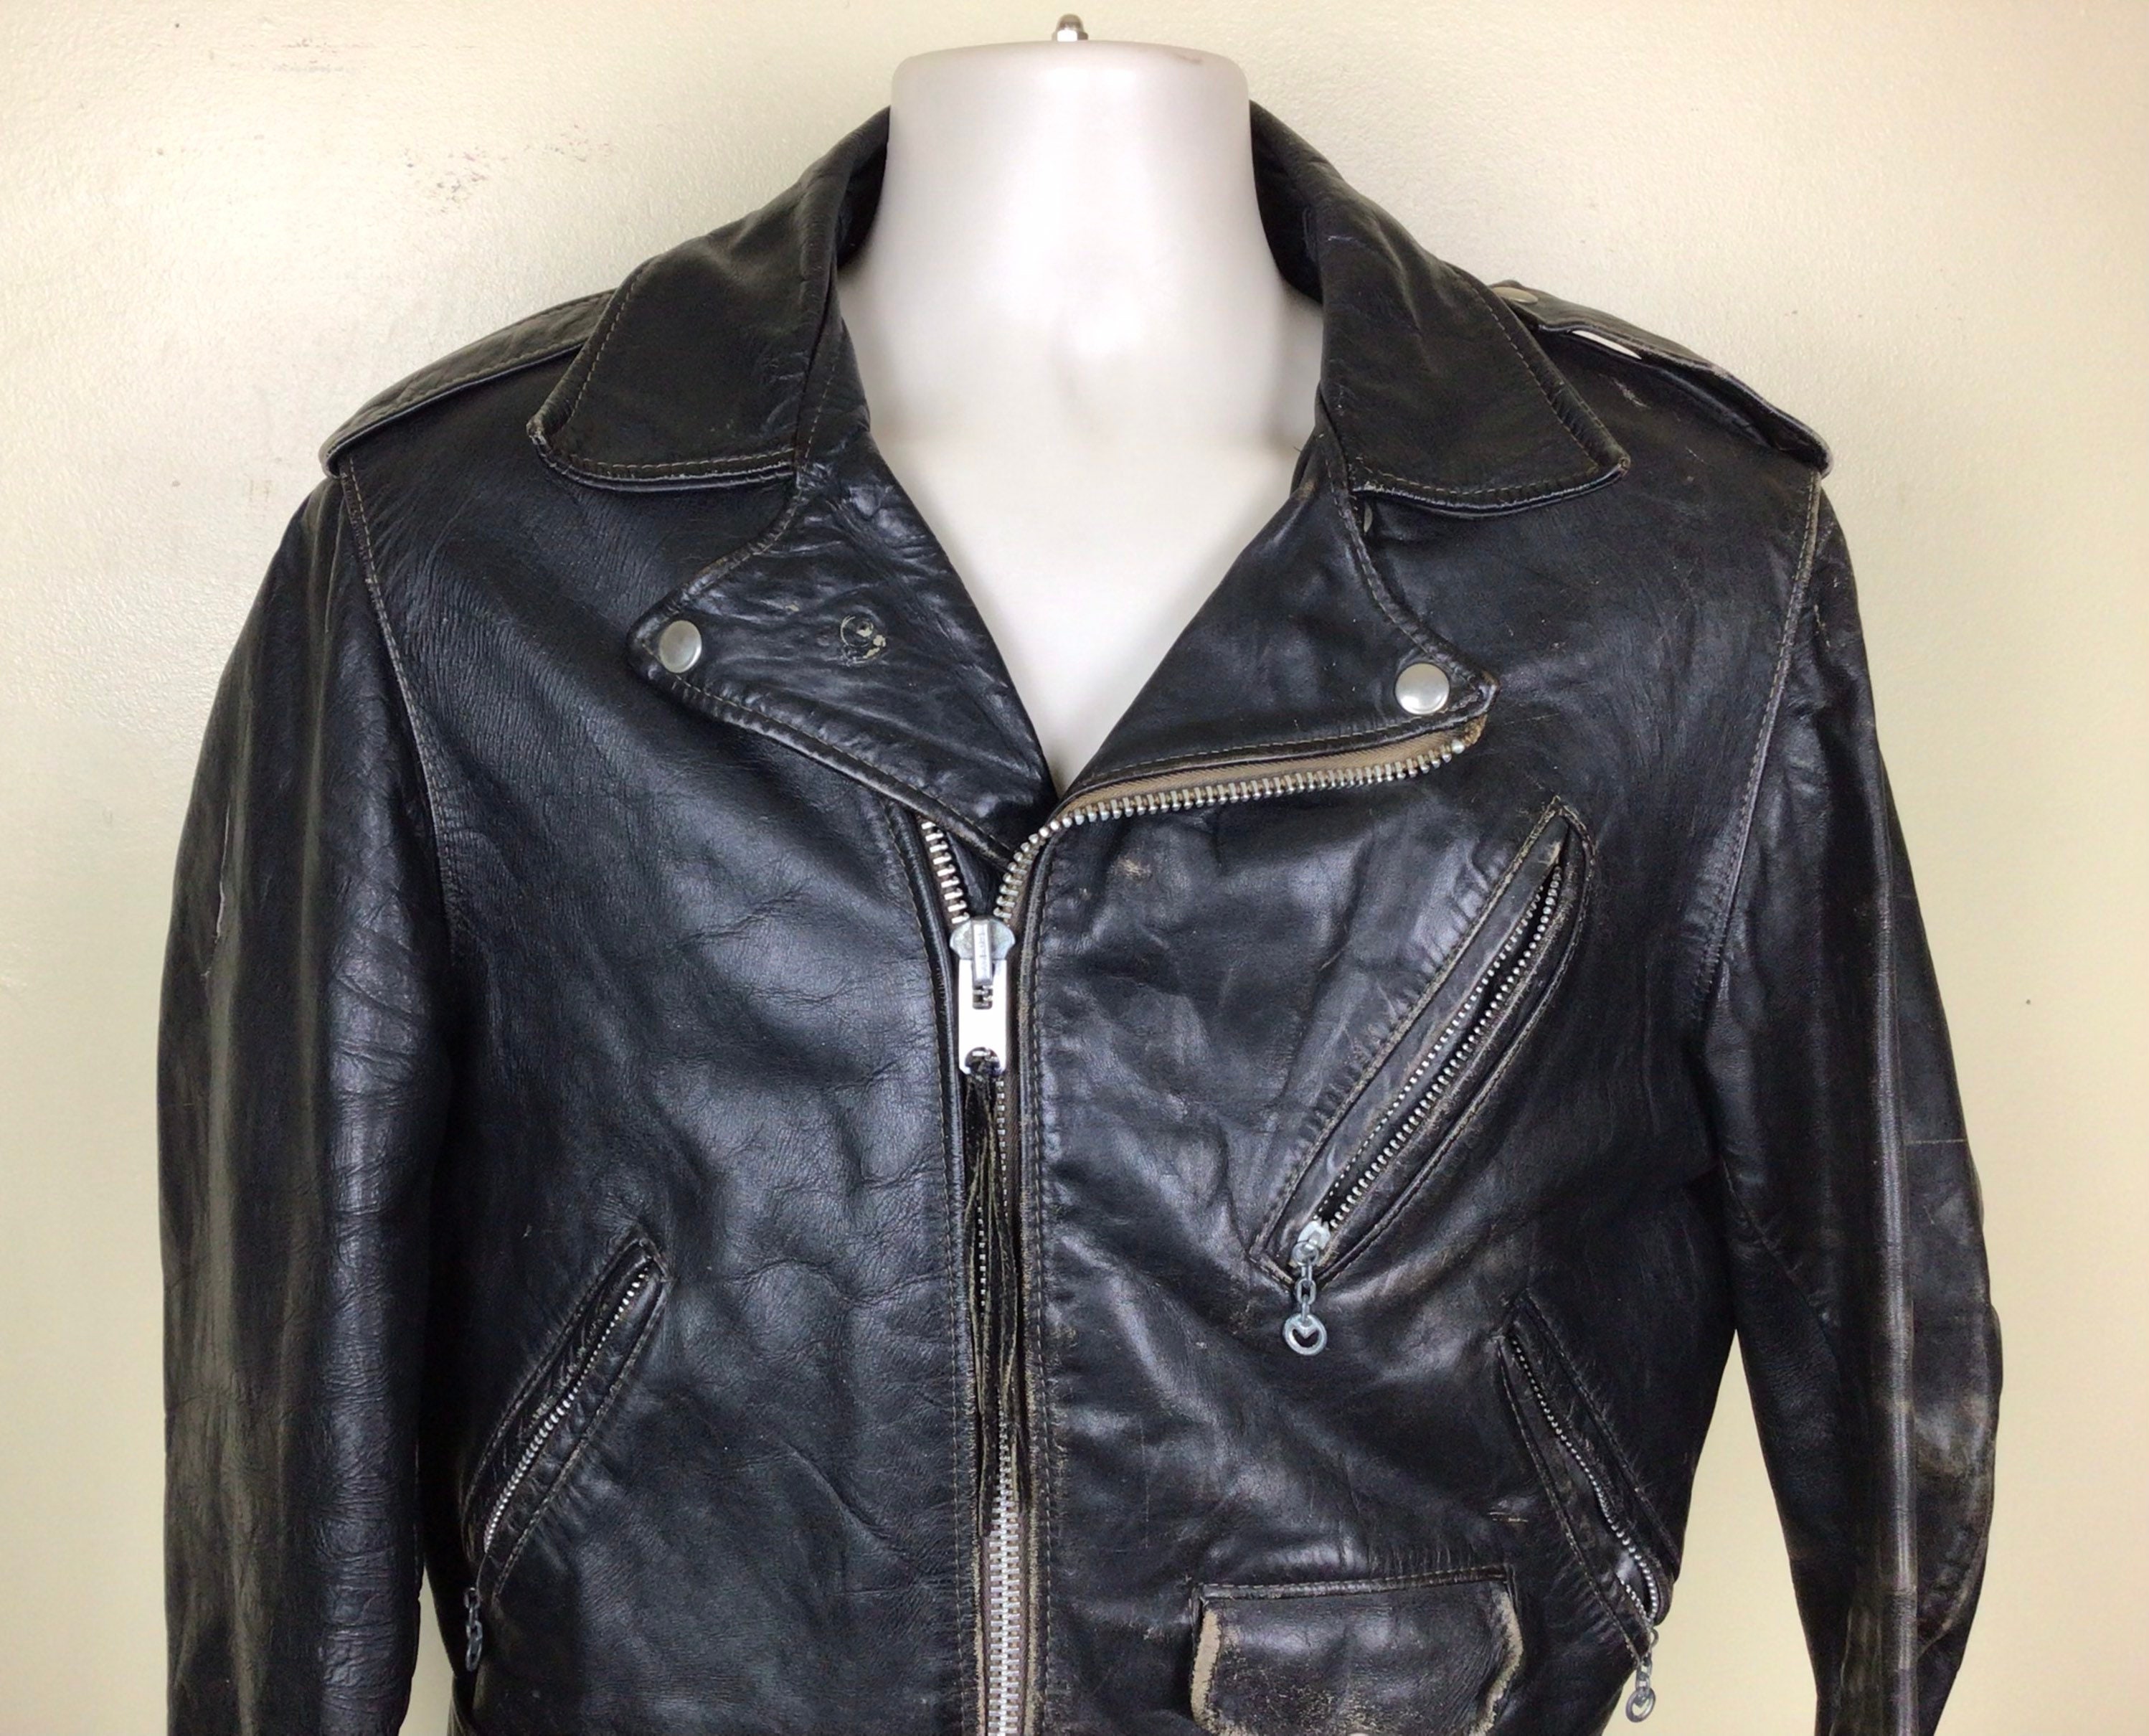 SCHOTT N.Y.C. FITTED PERFECTO® LEATHER JACKET - Choppermonster